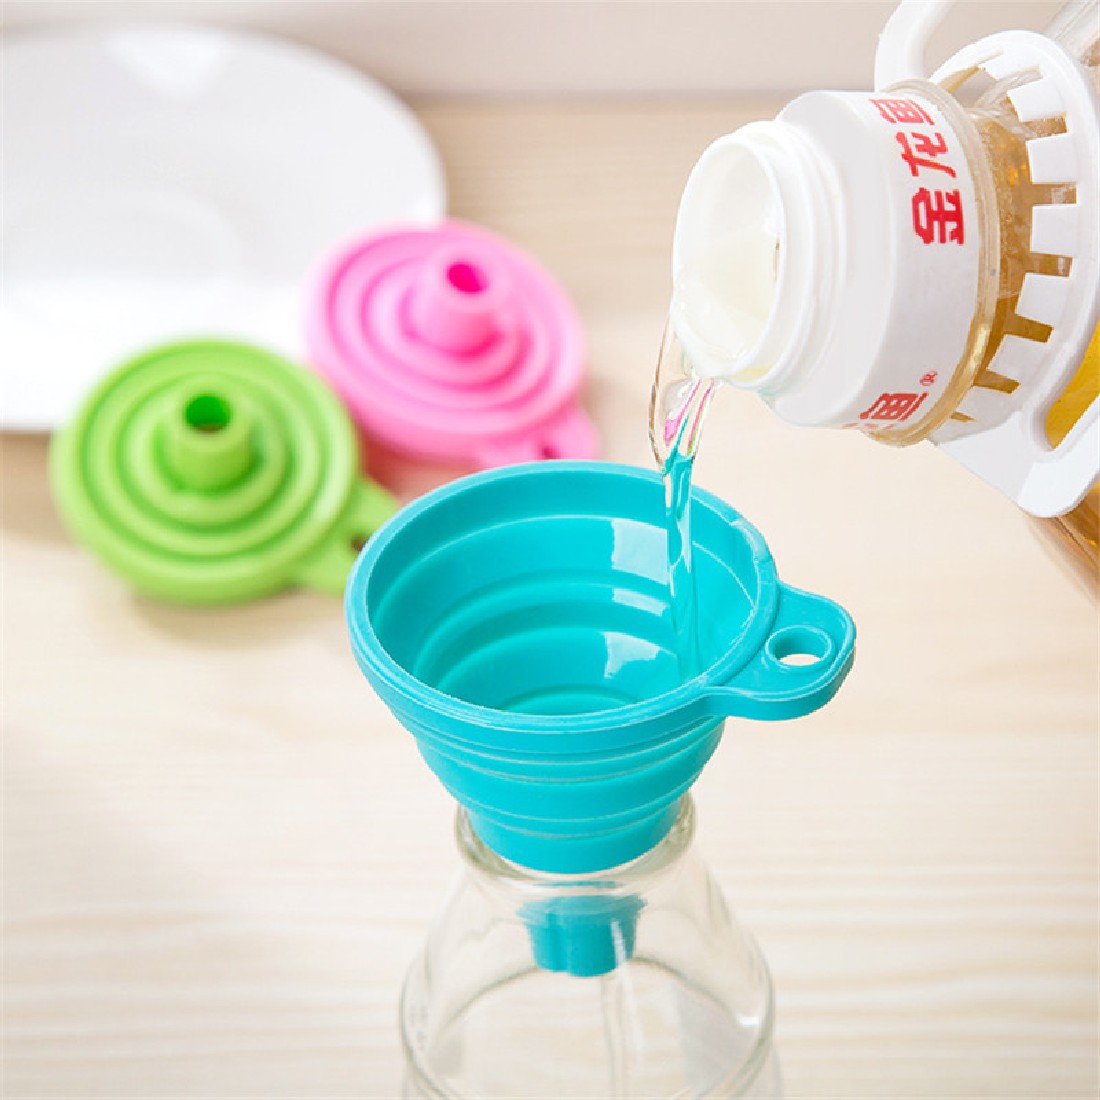 Useful Collapsible Style Funnel Hopper Protable Mini Silicone Gel Foldable Kitchen Cooking Tools Accessories Gadgets D3